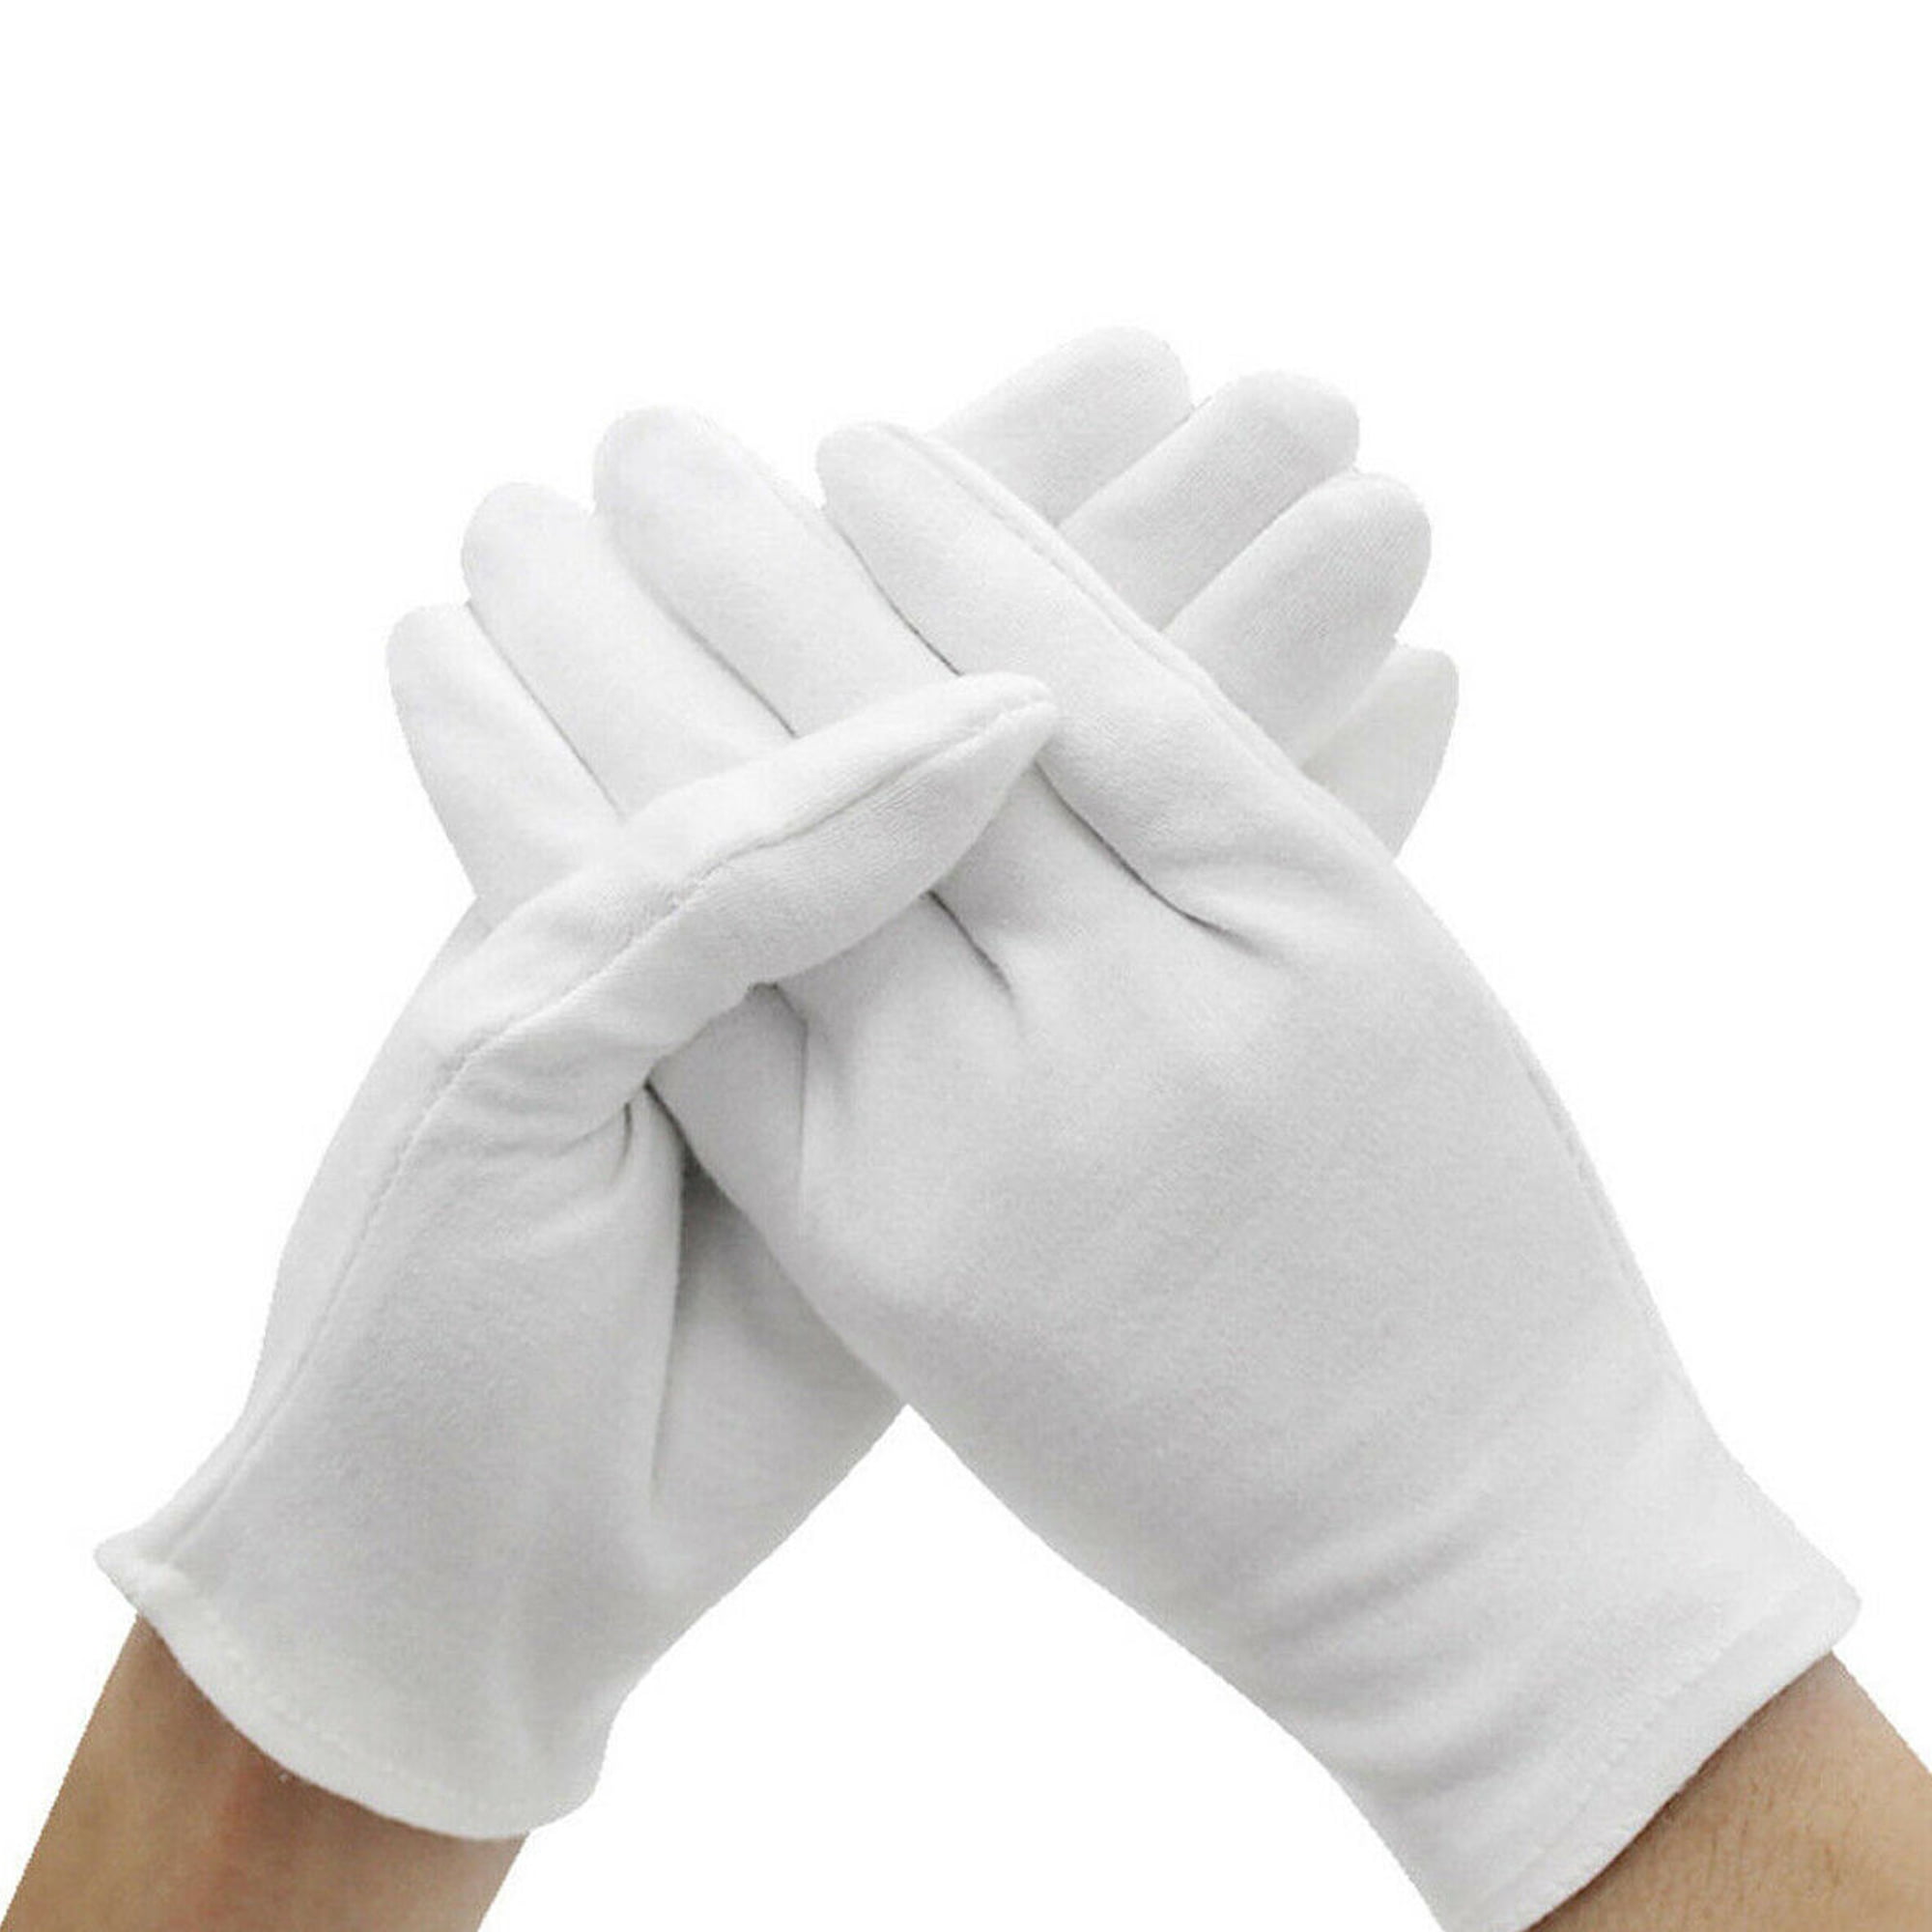 12 Pairs White Gloves 100% Soft Cotton Gloves Coin Jewelry Inspection Work UK 